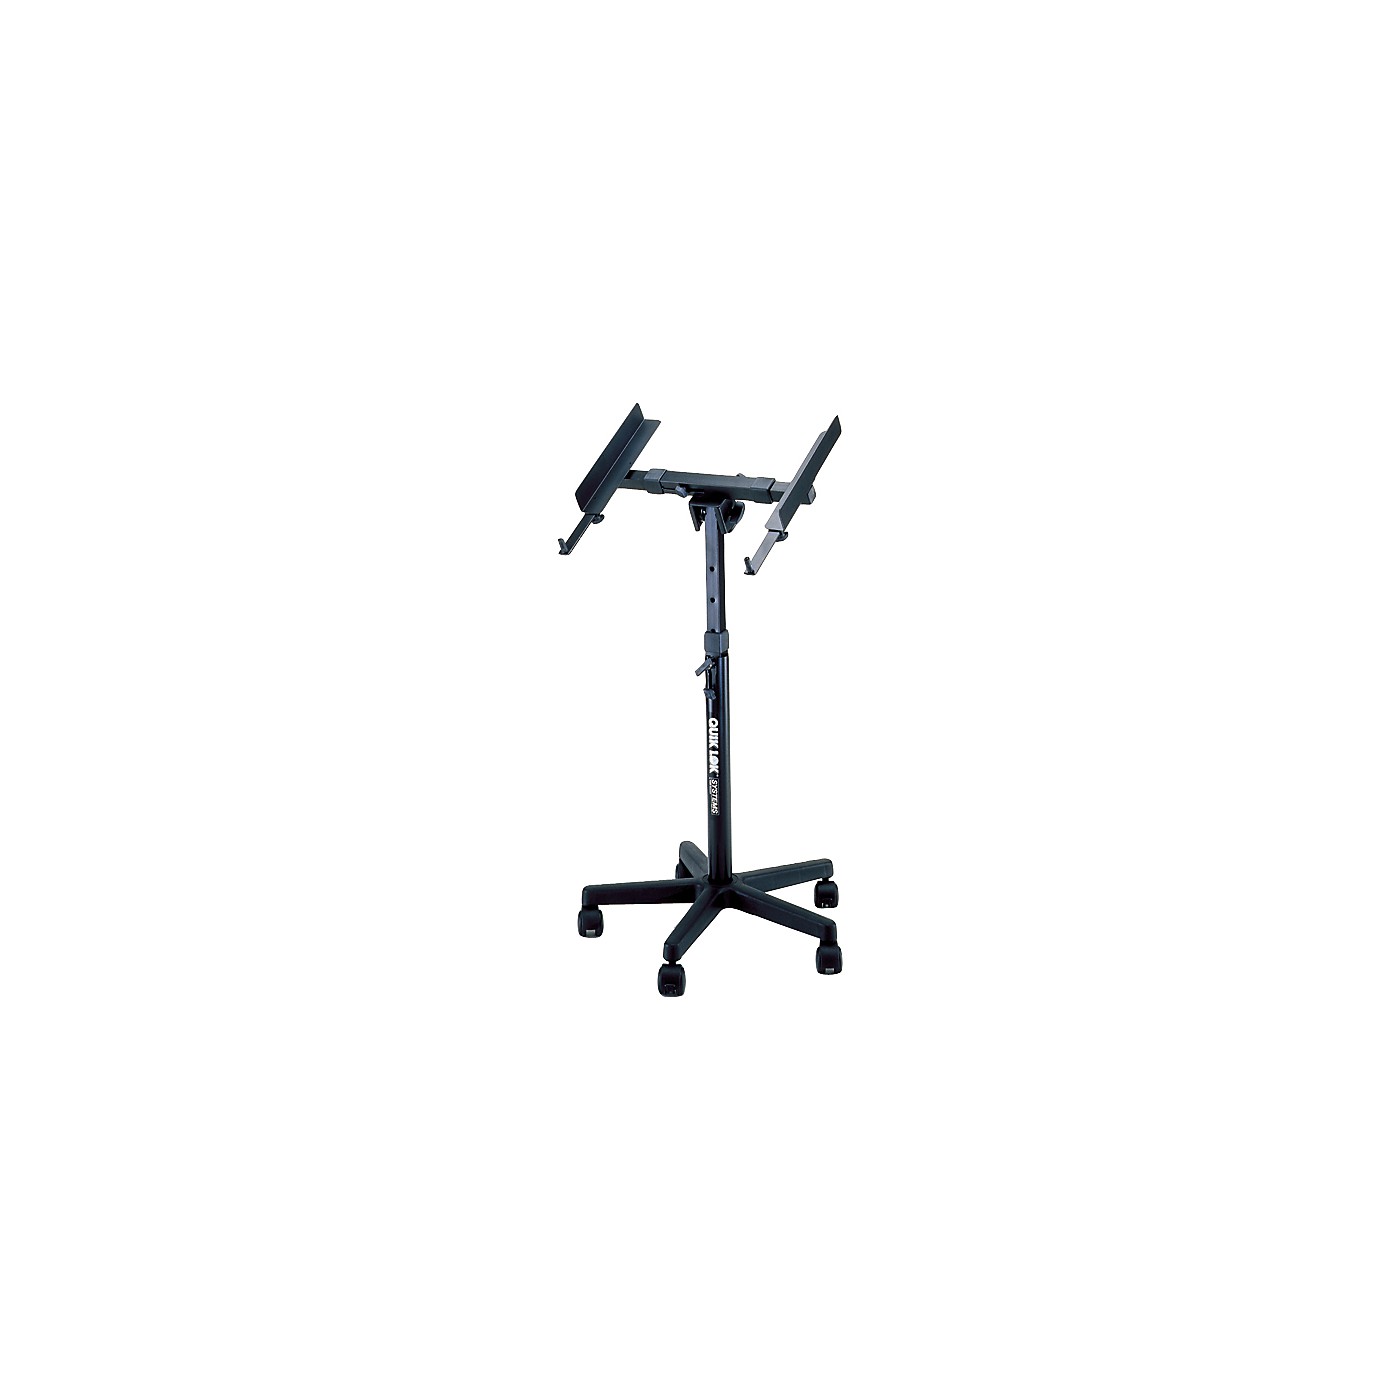 Quik-Lok QL-400 Fully Adjustable Mixer Stand with Casters thumbnail